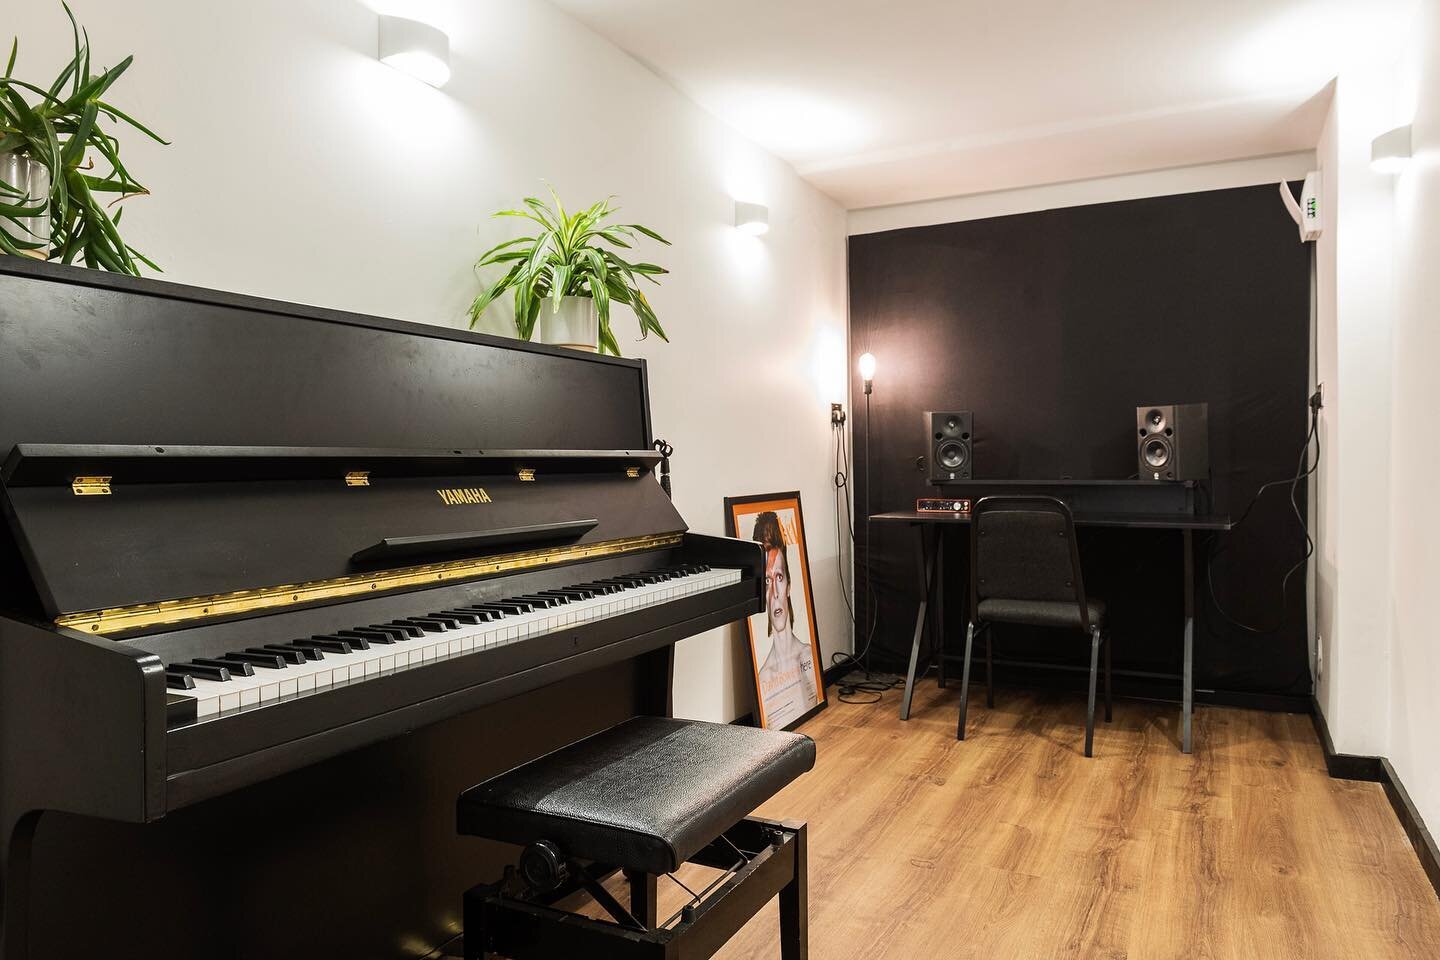 Hear ye hear ye! 

Studio 4 is now available for bookings. Featuring a full size acoustic piano 🎹 and a song writing desk complete with speakers 🔊, audio card and condenser mic 🎤 The perfect room for your practice or song writing sessions. Studio 